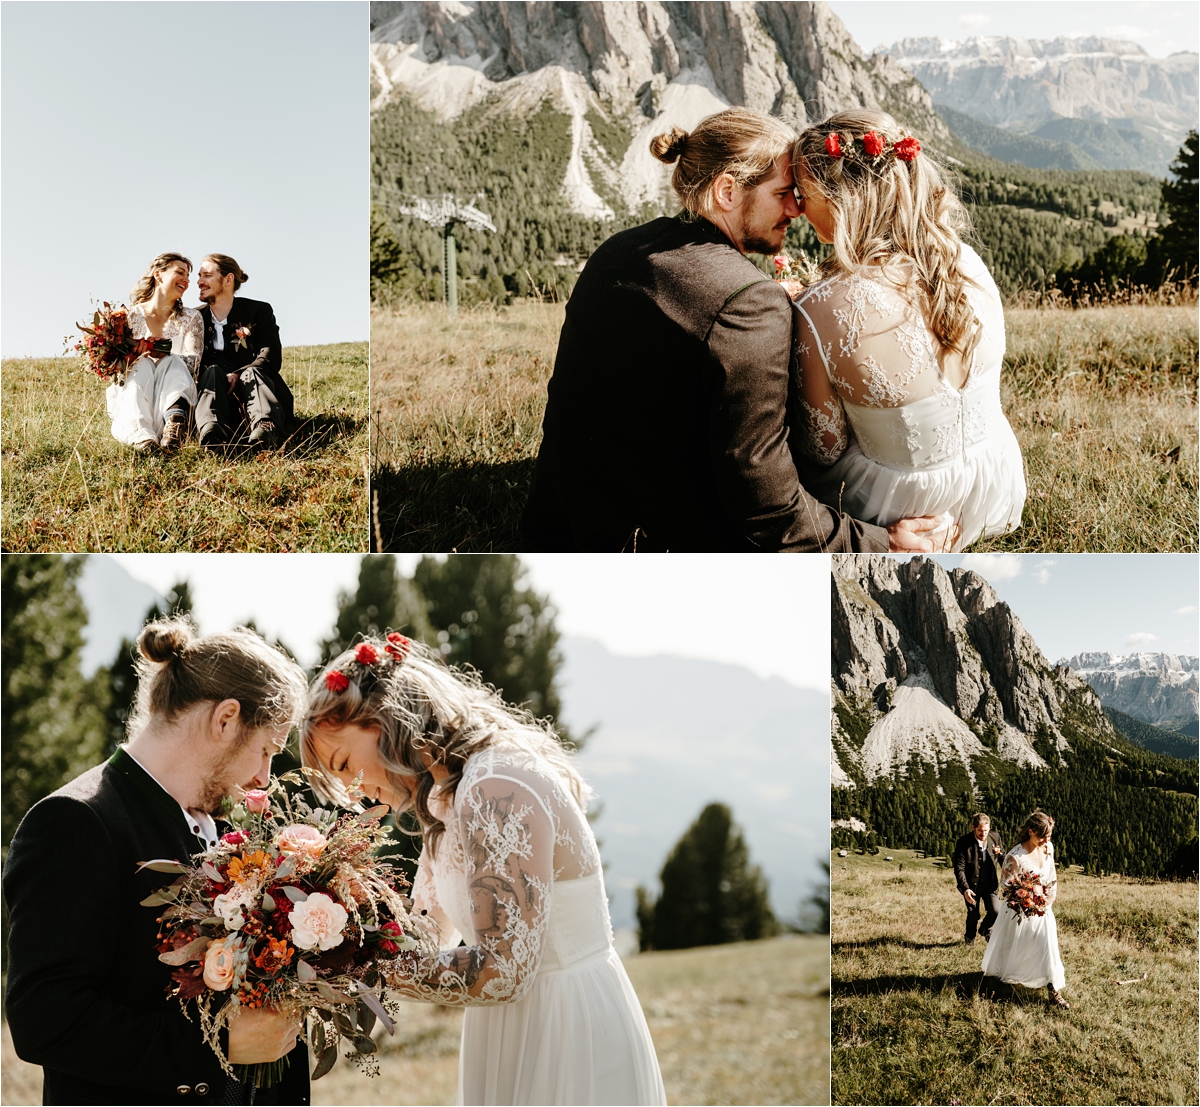 Bride and groom enjoy the views of the Alpe di Siusi in the Dolomites. Photos by Wild Connections Photography